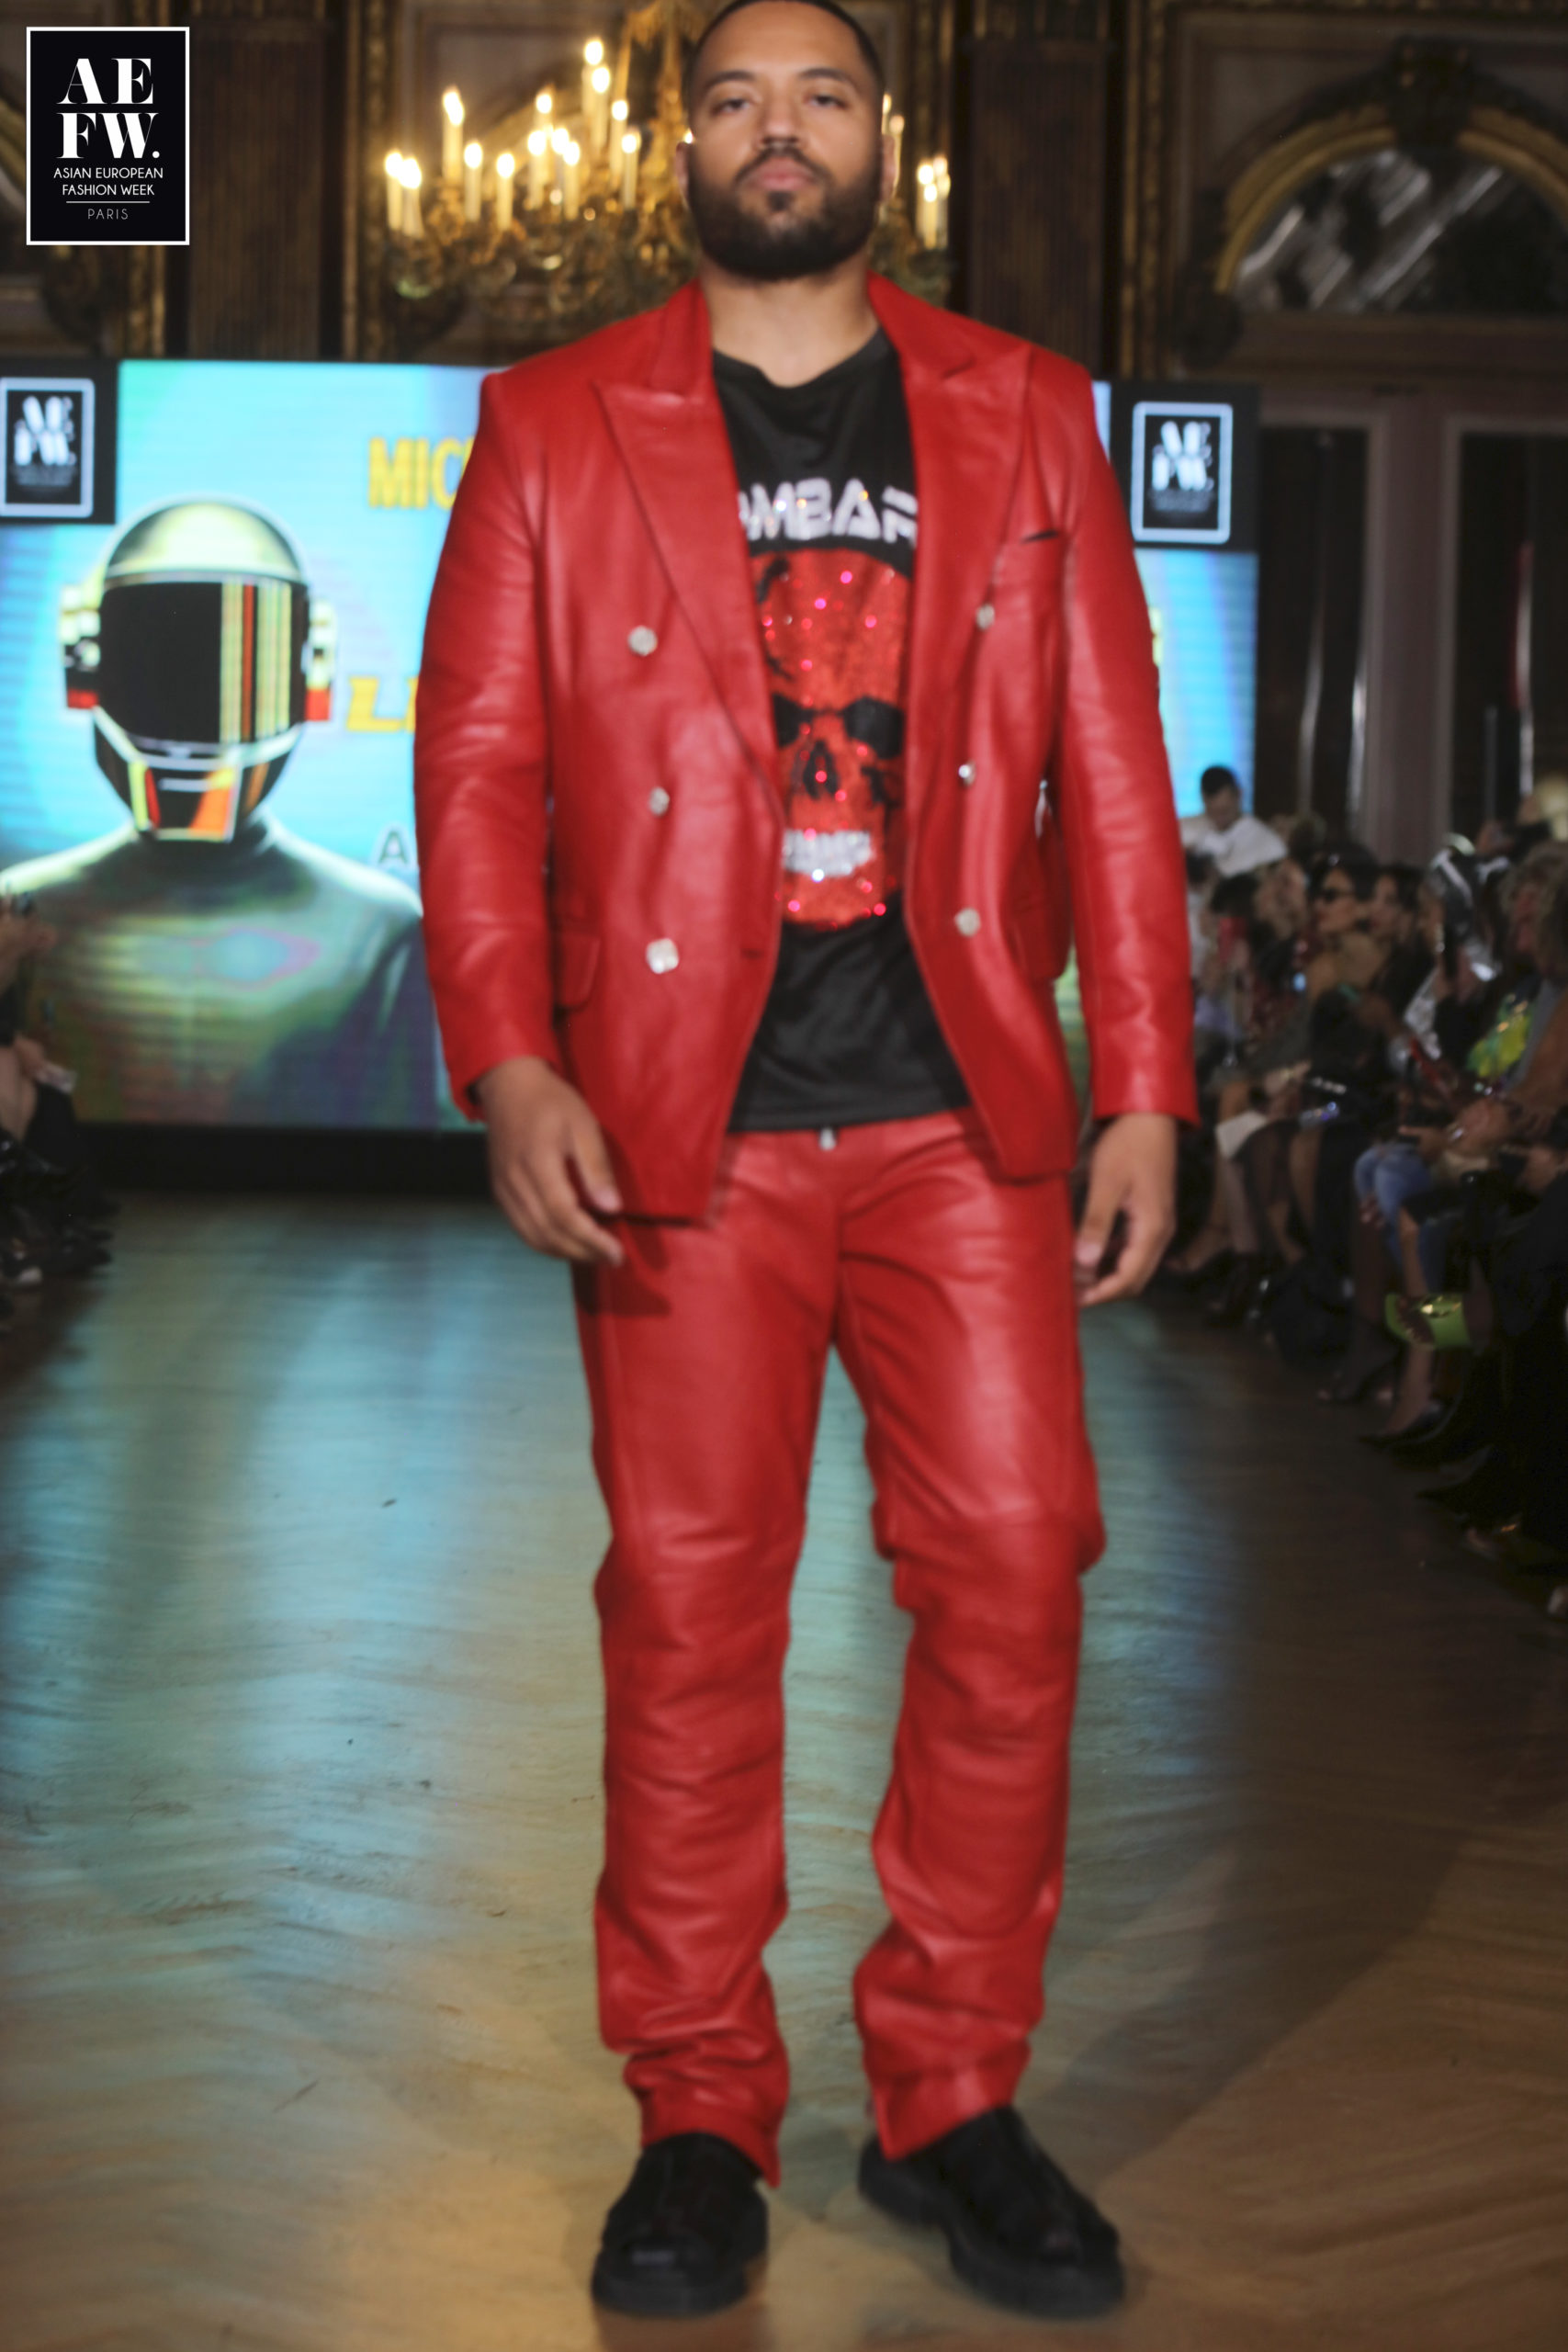 AEFW (Asian European Fashion Week - MICHAEL LOMBARD - ML SOLO PARIS - The King of Leather - PFW SS24  - WEST IN PARIS-VENDOME